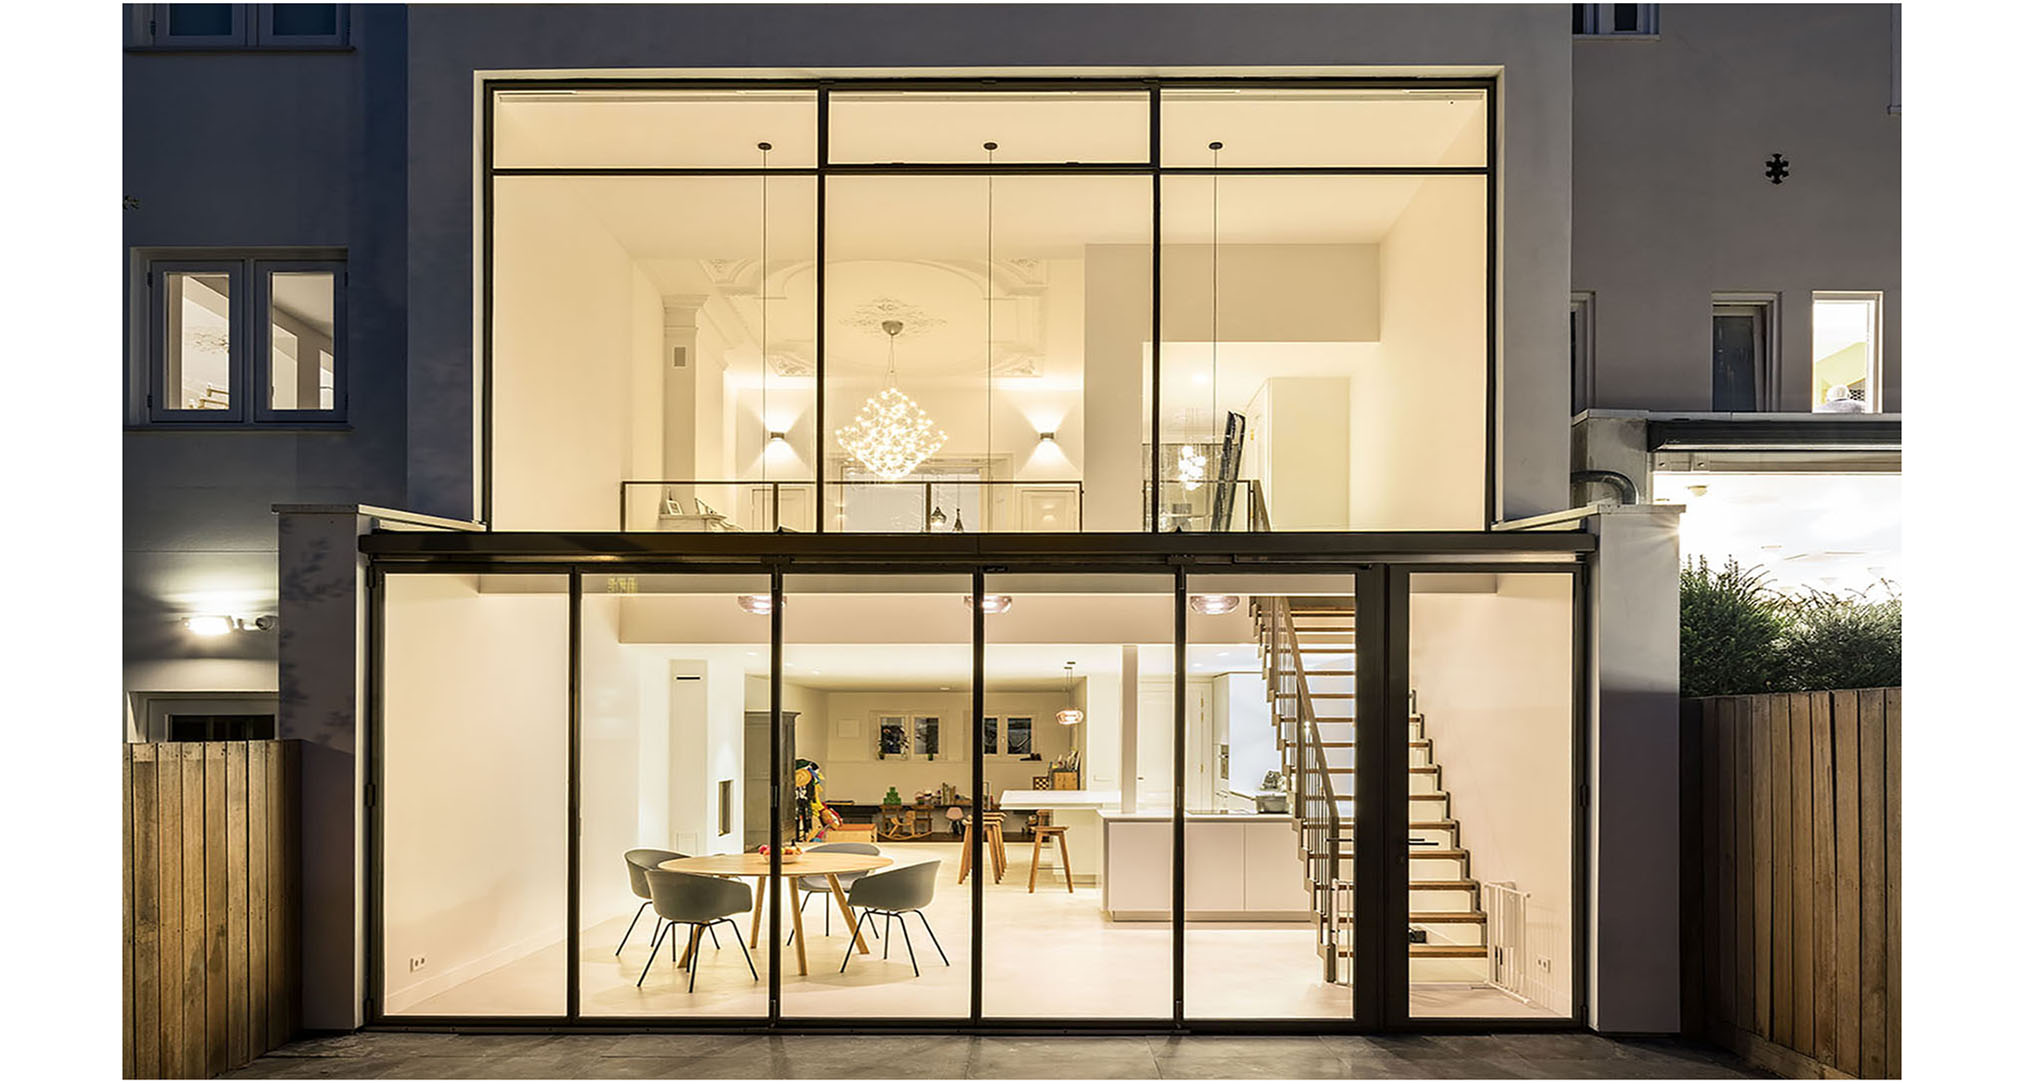 The interior visible through MHB folding doors of a residence in Amsterdam, the Netherlands long